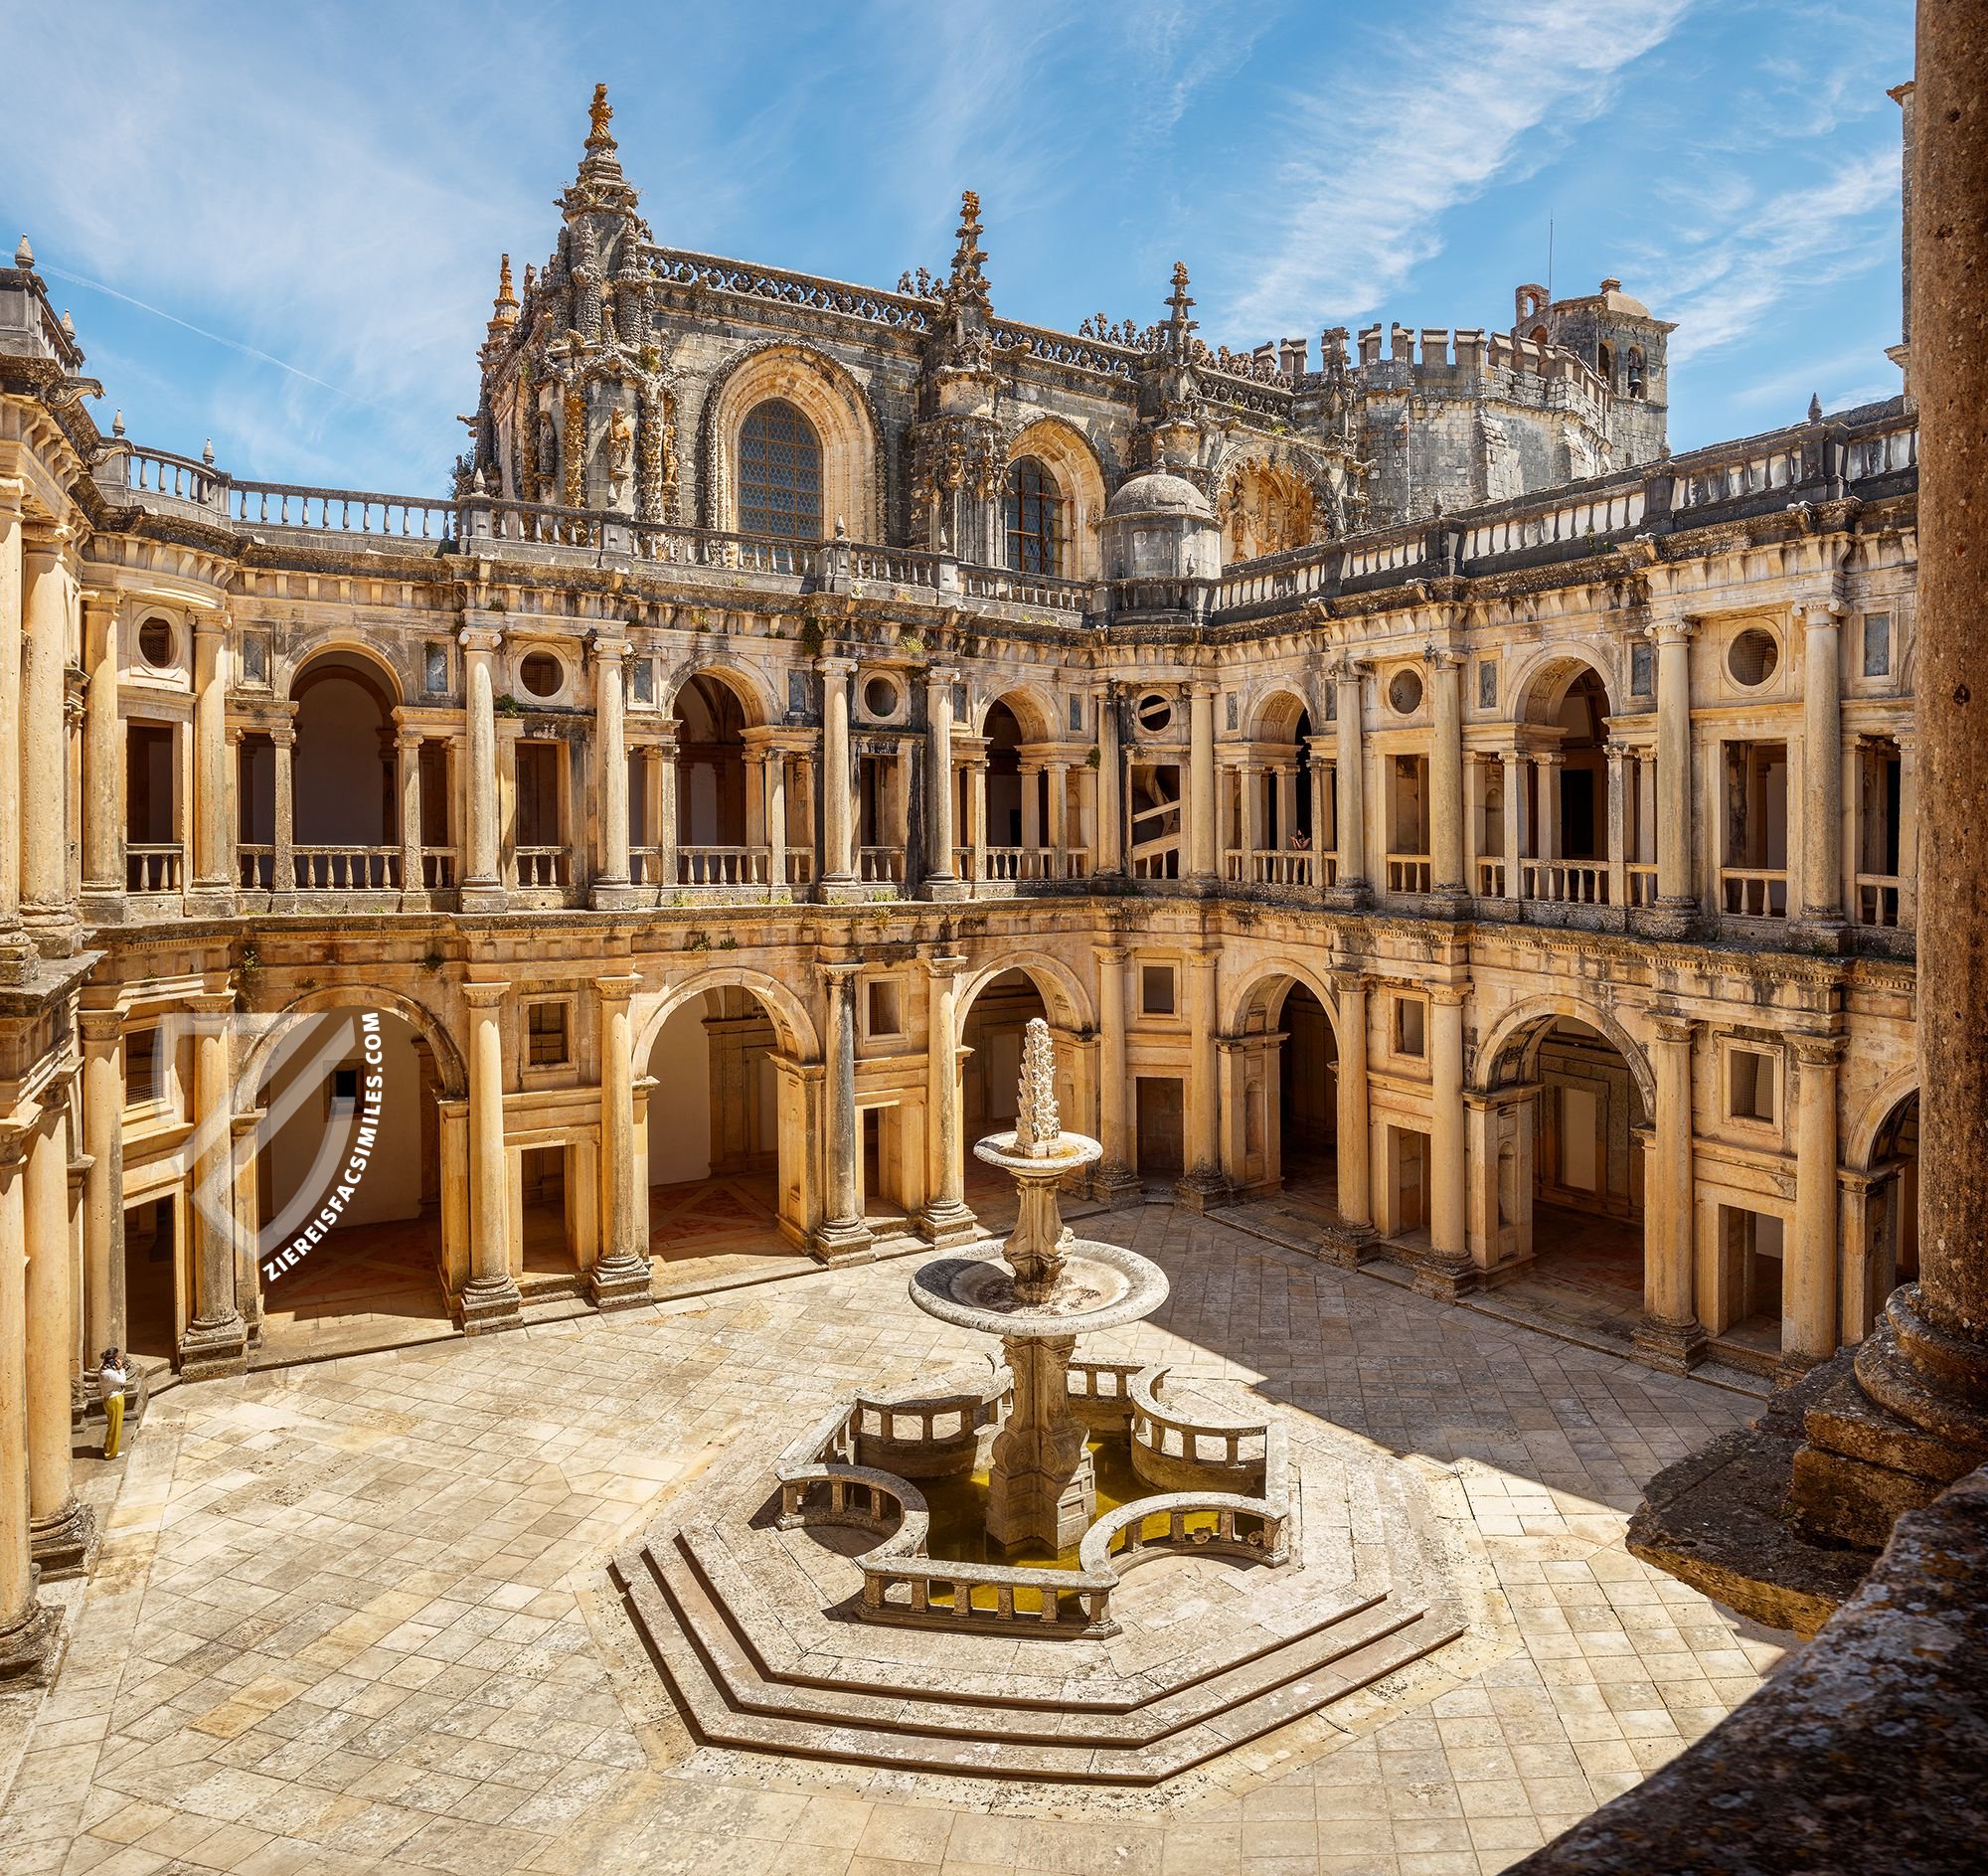 The Convent of Christ in Tomar - cloister (Source: iStock/Luis Fonseca)